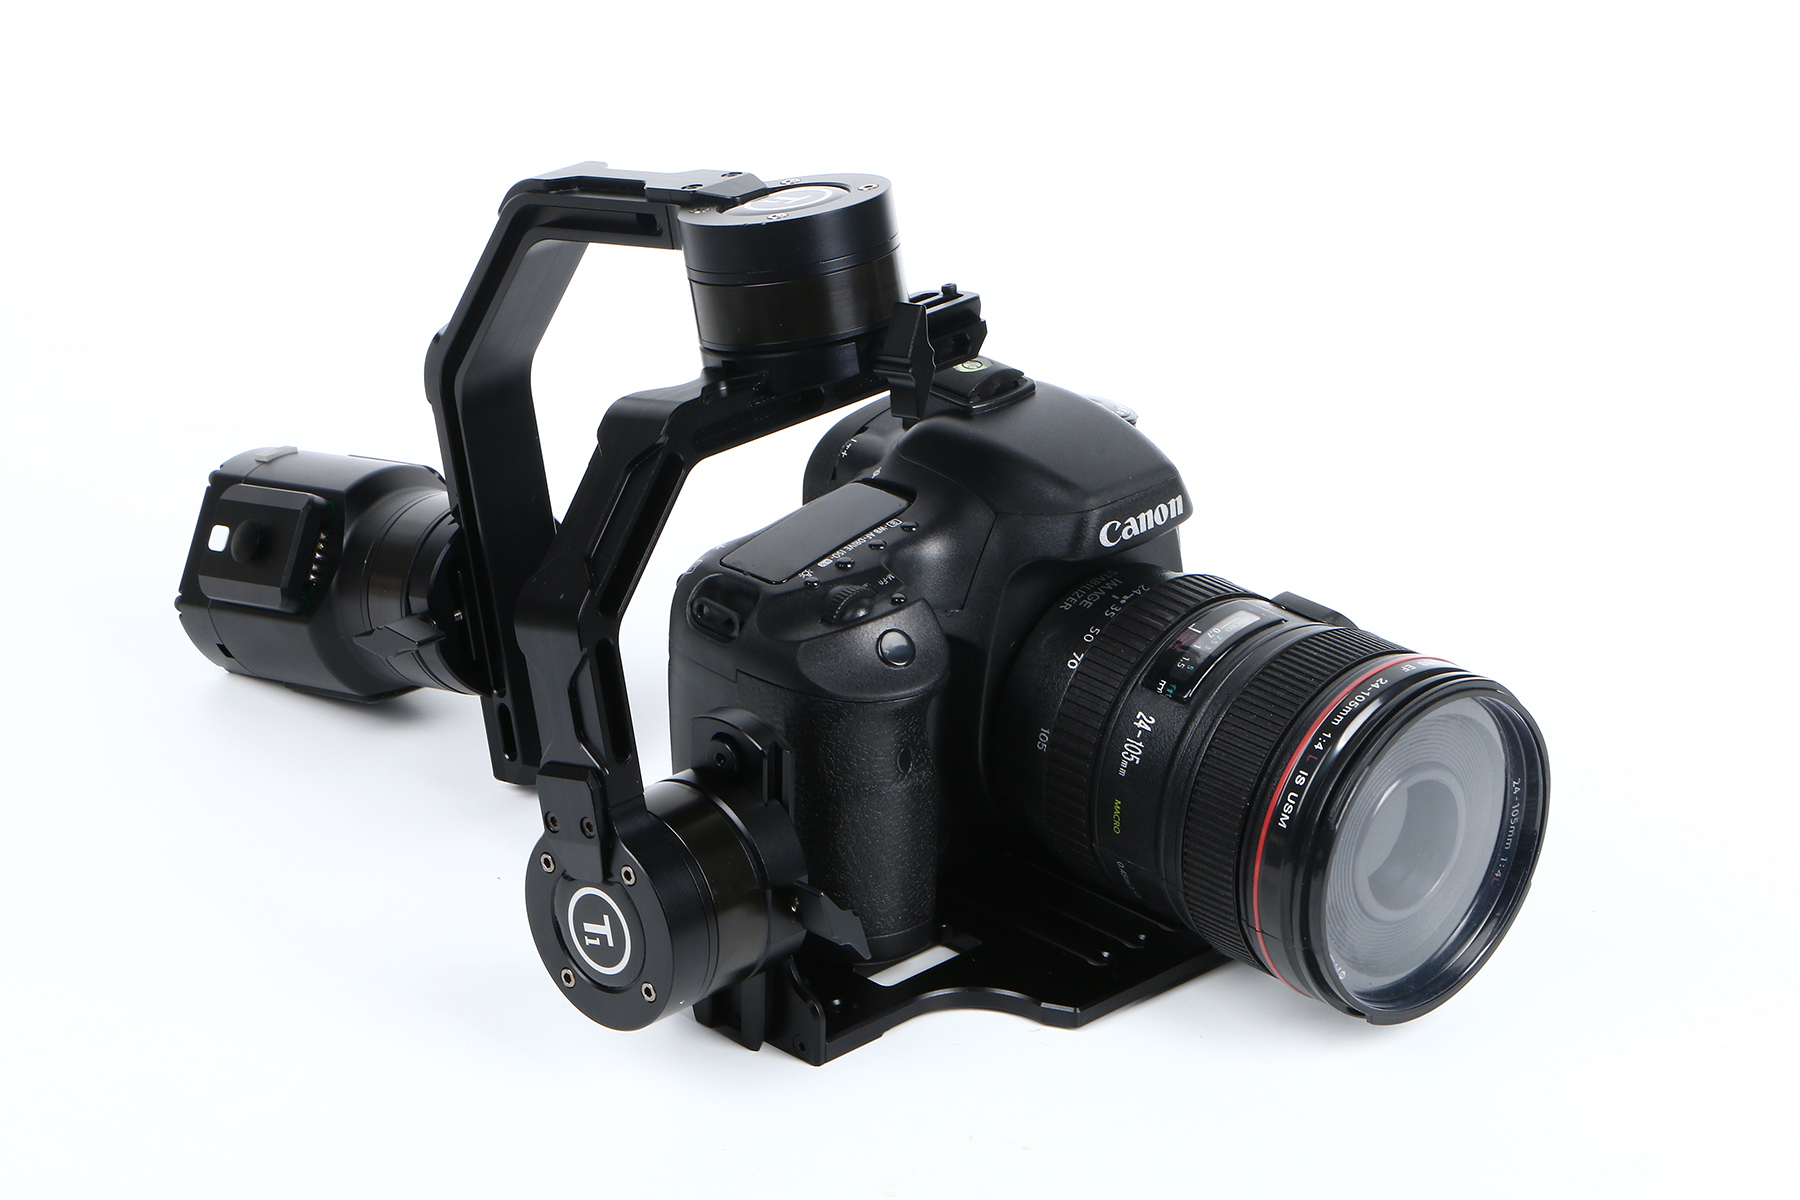 Ti 3-Axis Gimbal Handheld Stabilizer for small DSLR Cameras